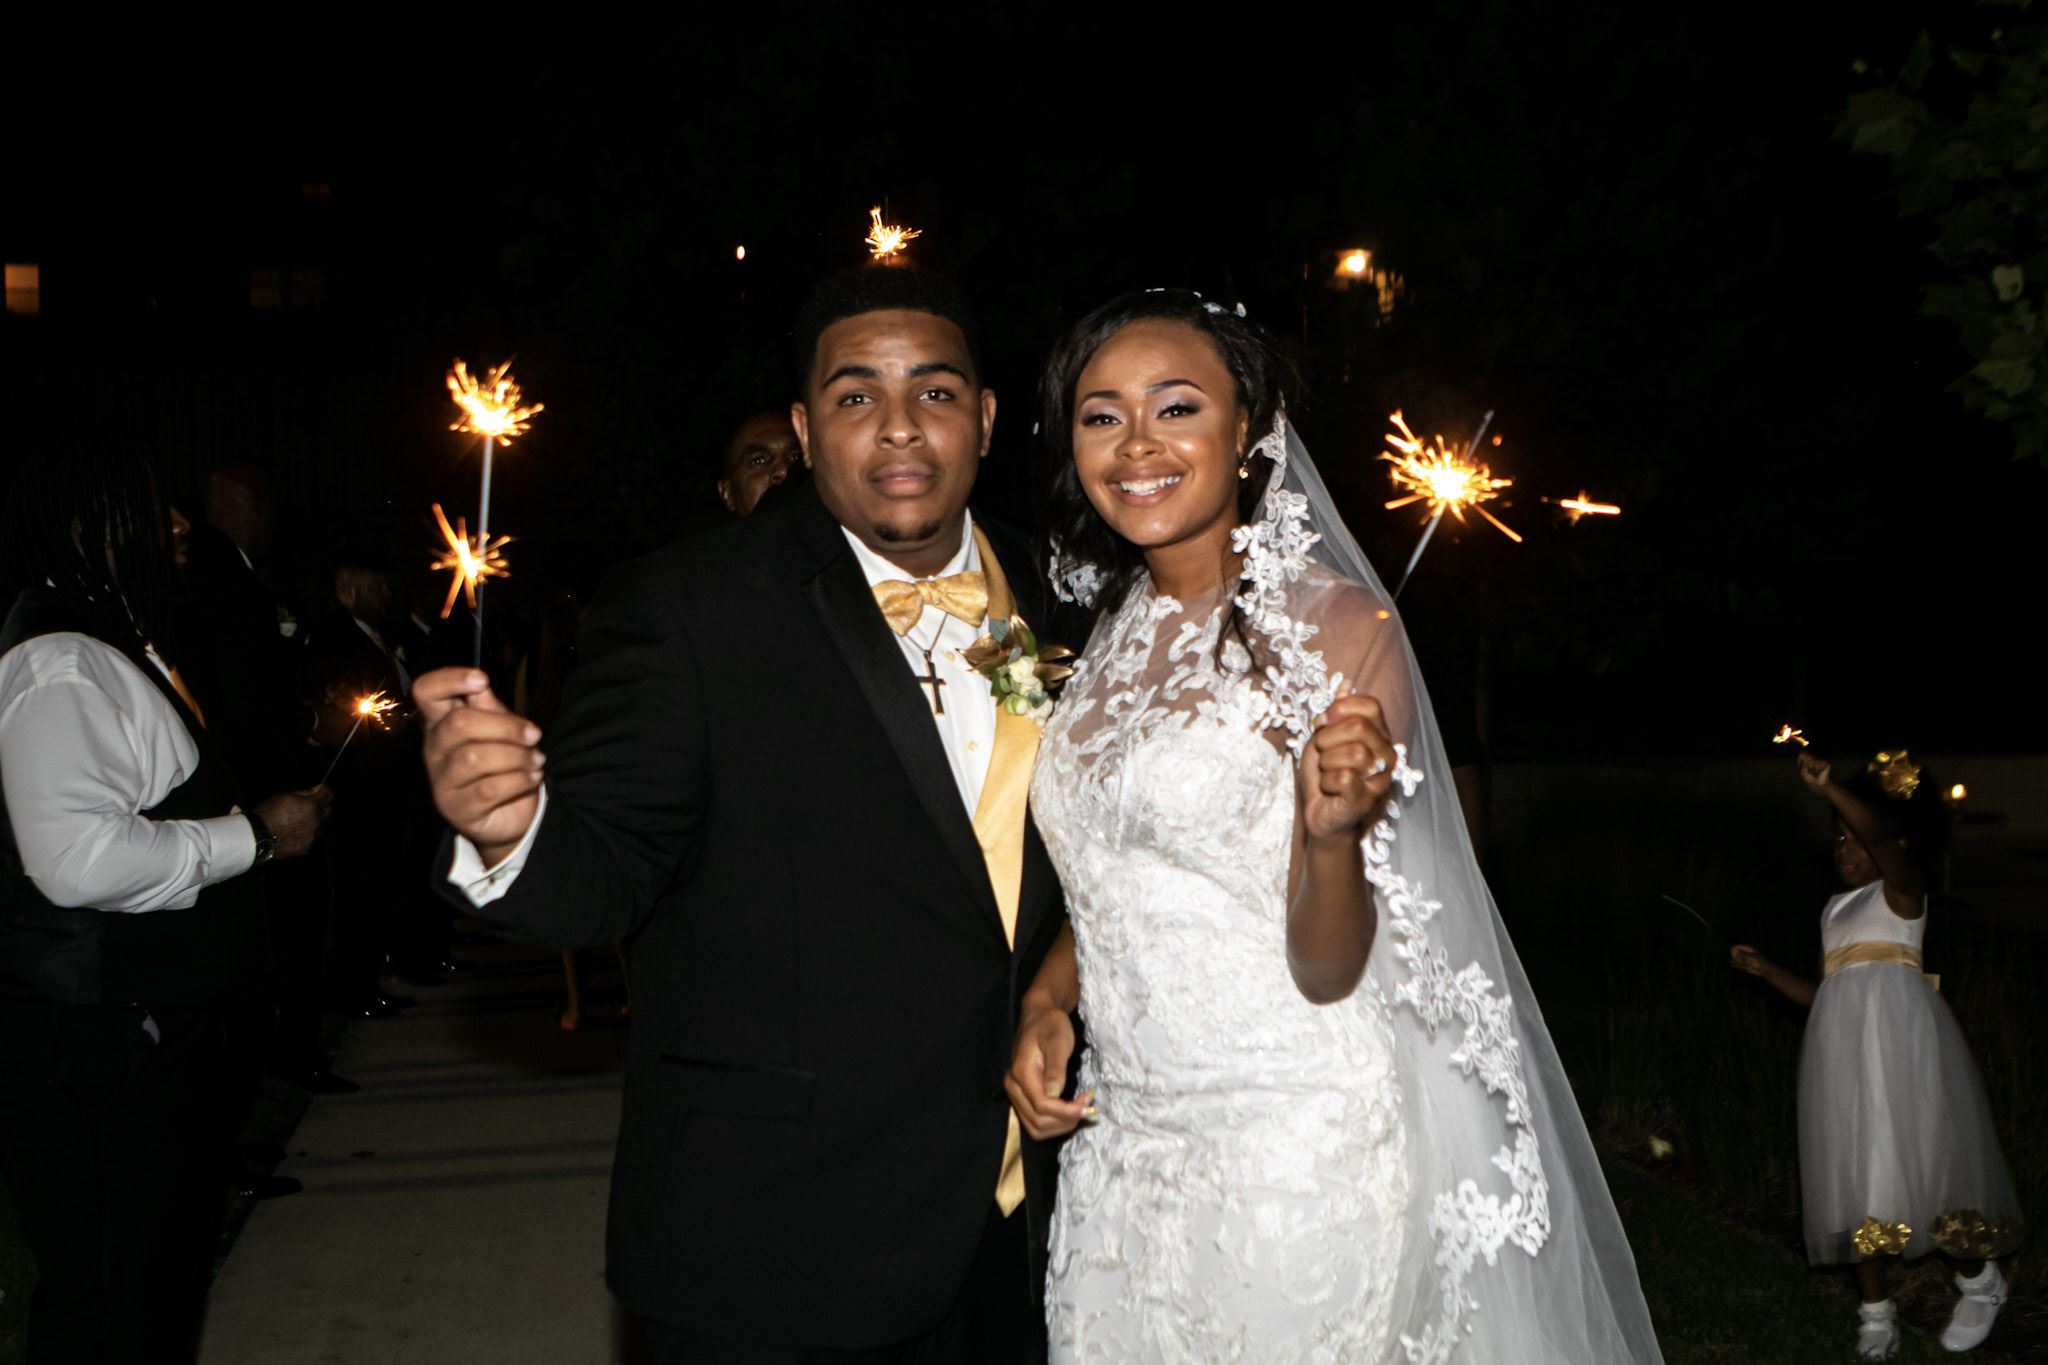 Bride and groom with sparklers.